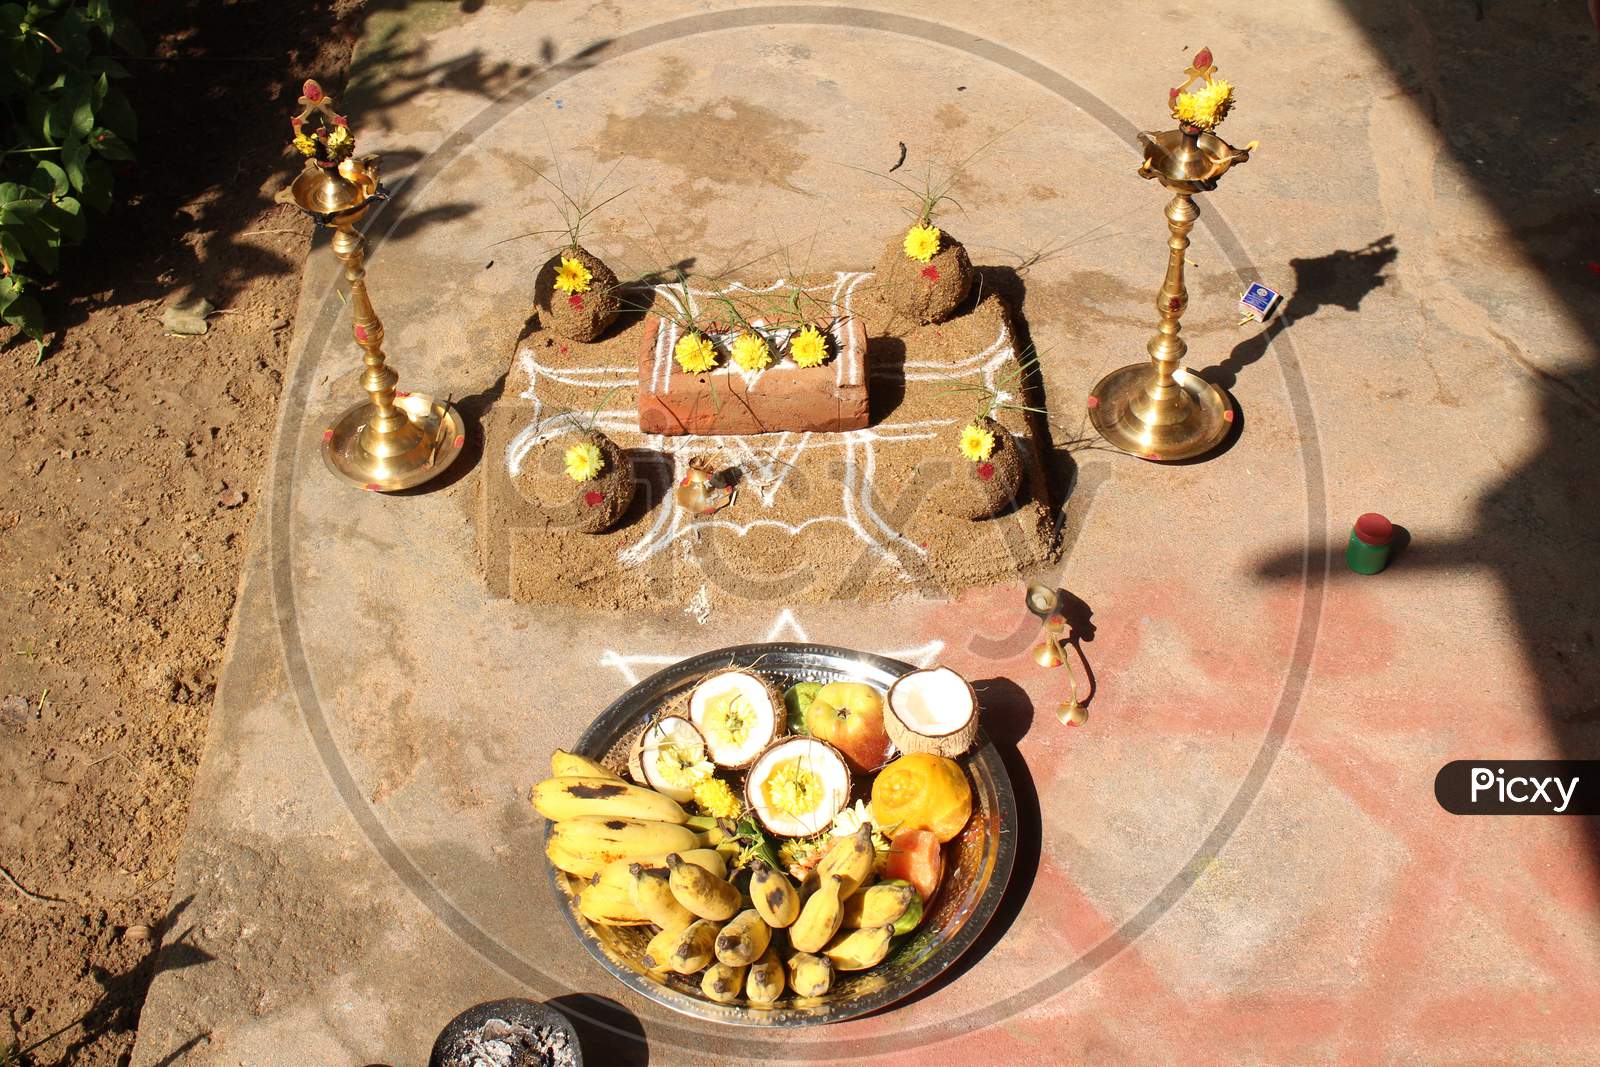 Celebrating Traditional Thai Pongal Festival To Sun God With Pot, Lamp, Wood Fire Stove, Fruits And Sugarcane